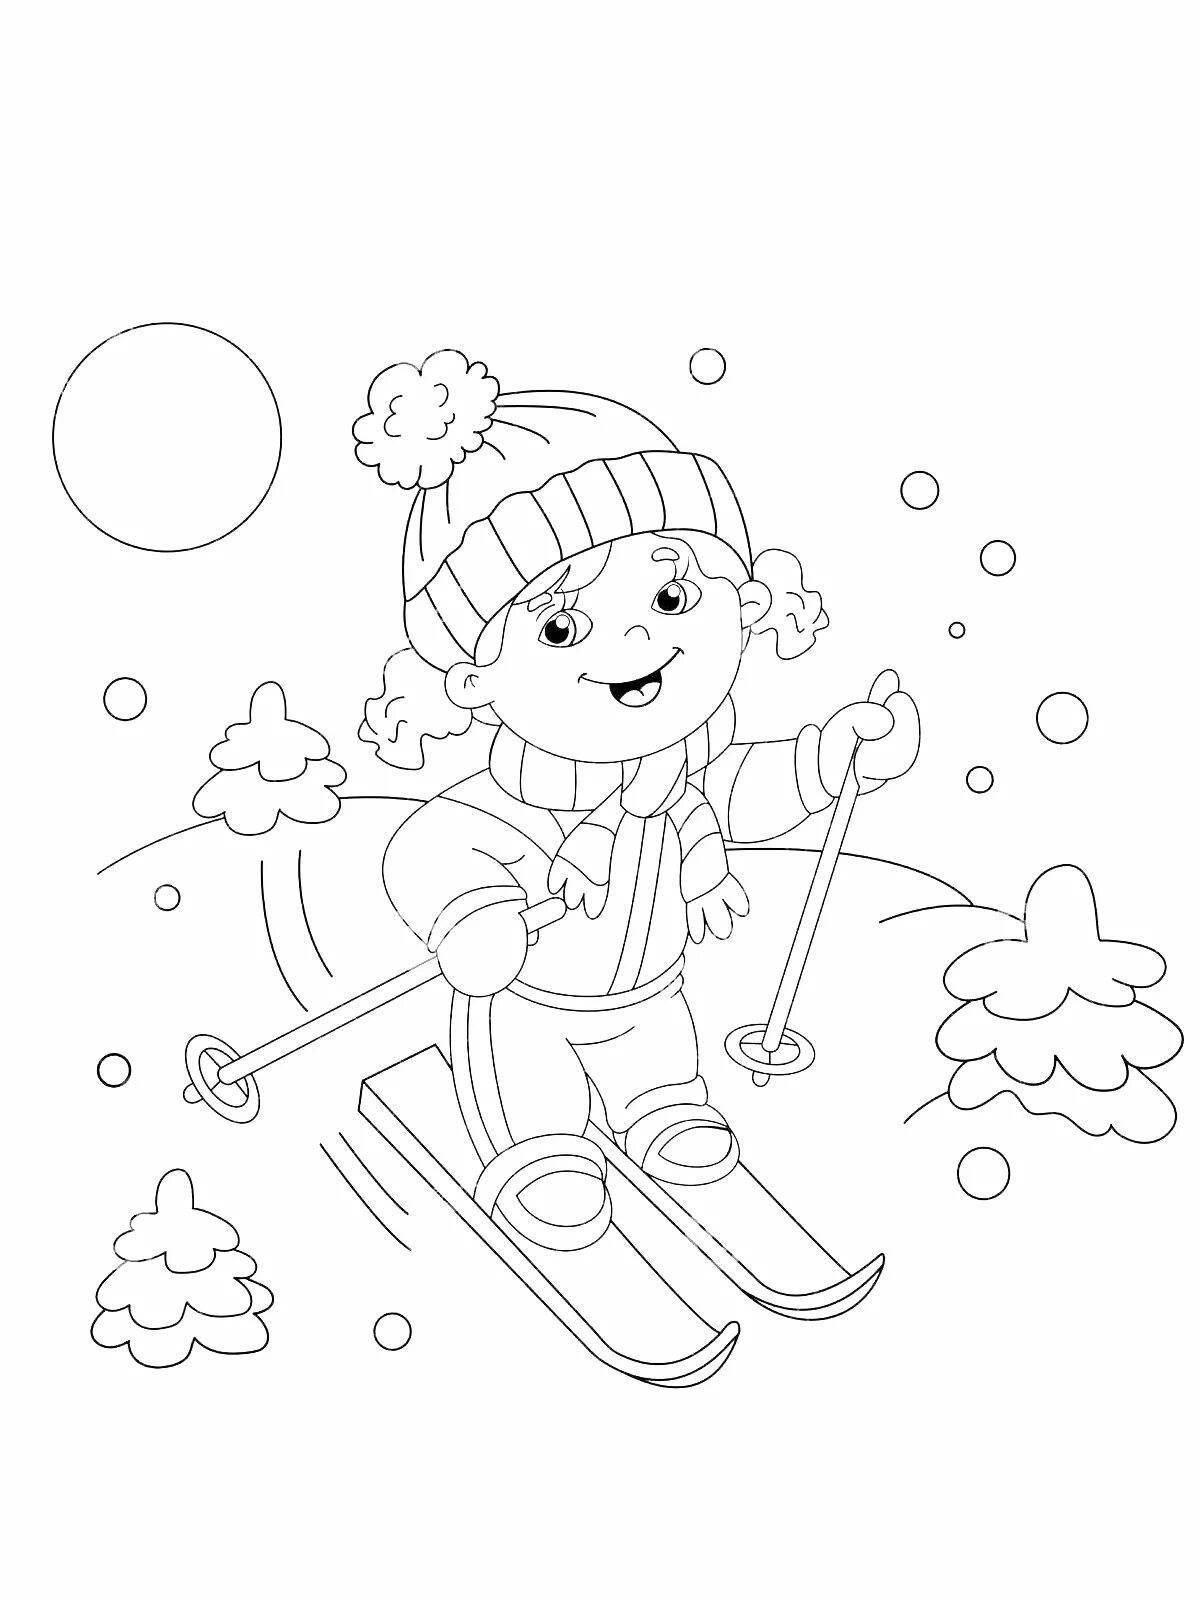 Coloring book winter sports for children 6-7 years old